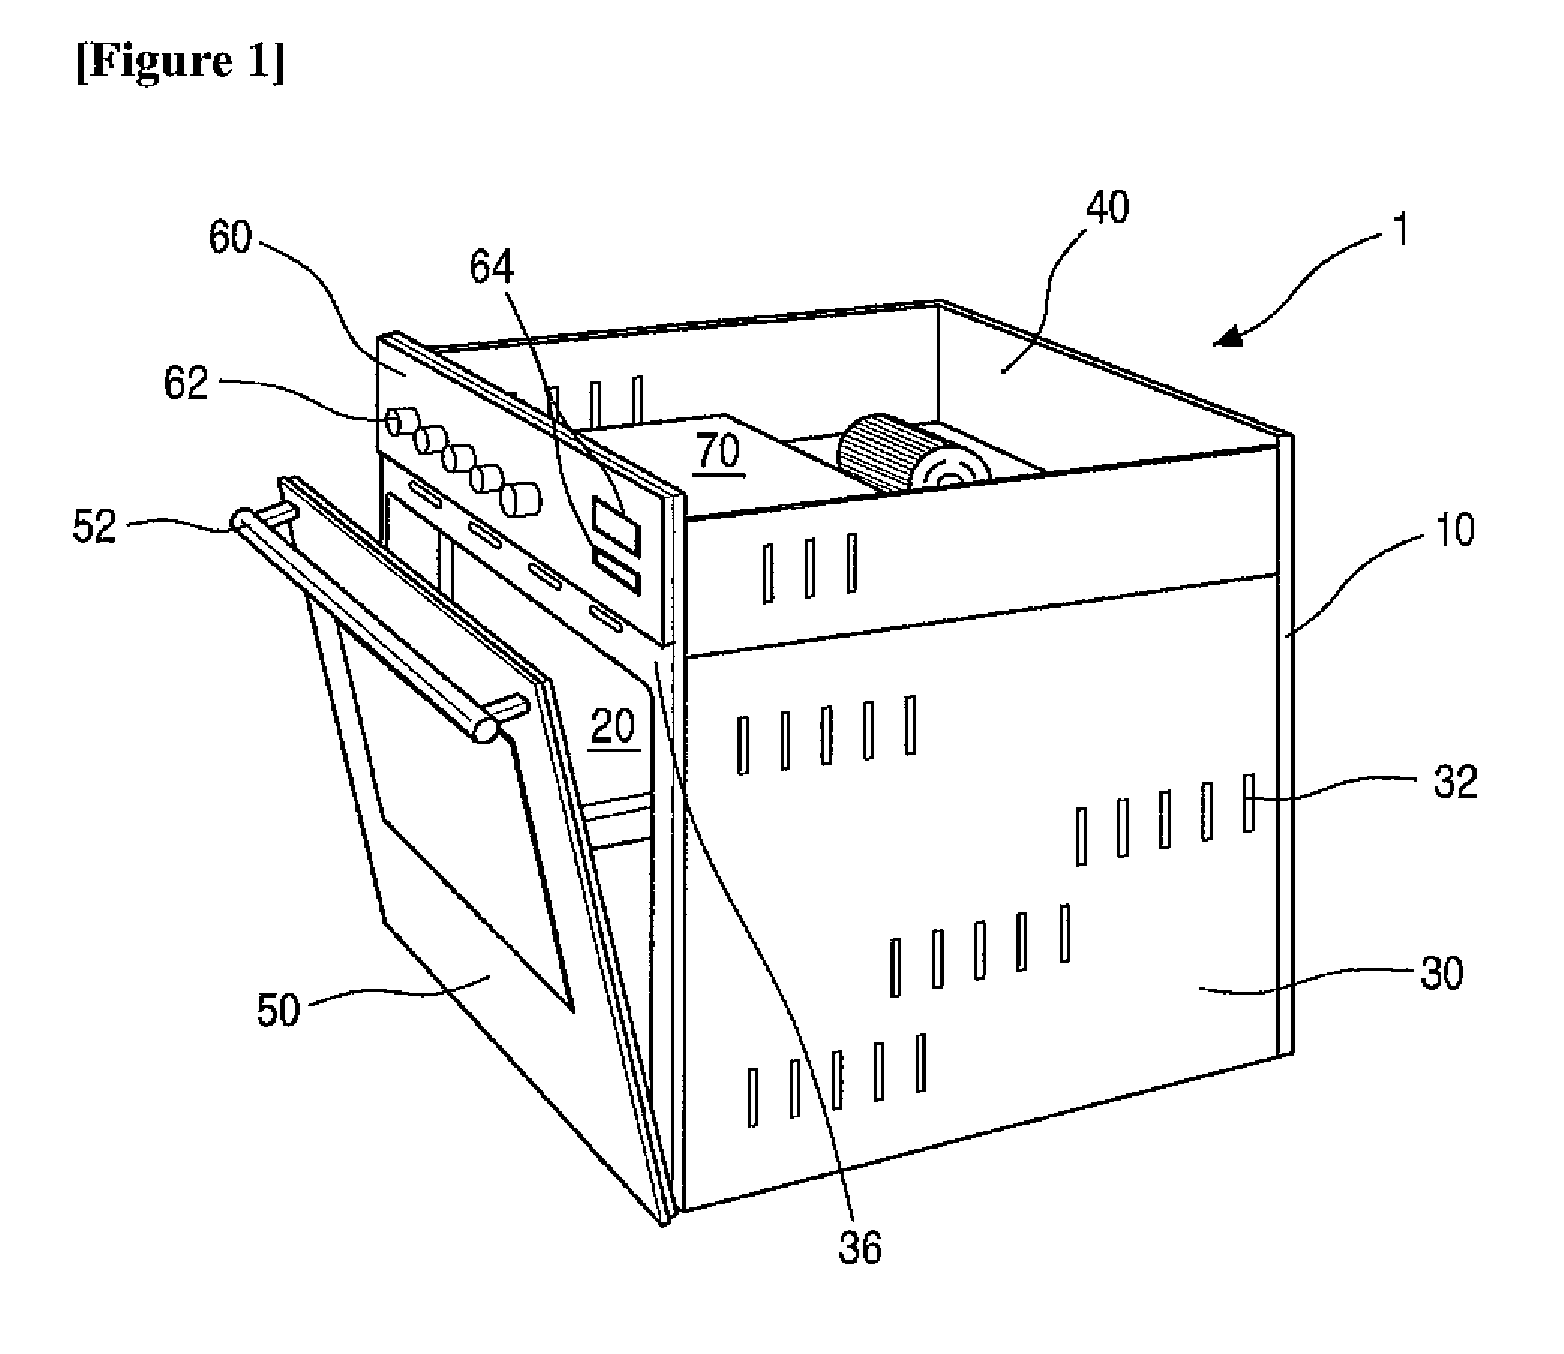 Electric oven with multiple broil heaters and method for preheating the electric oven